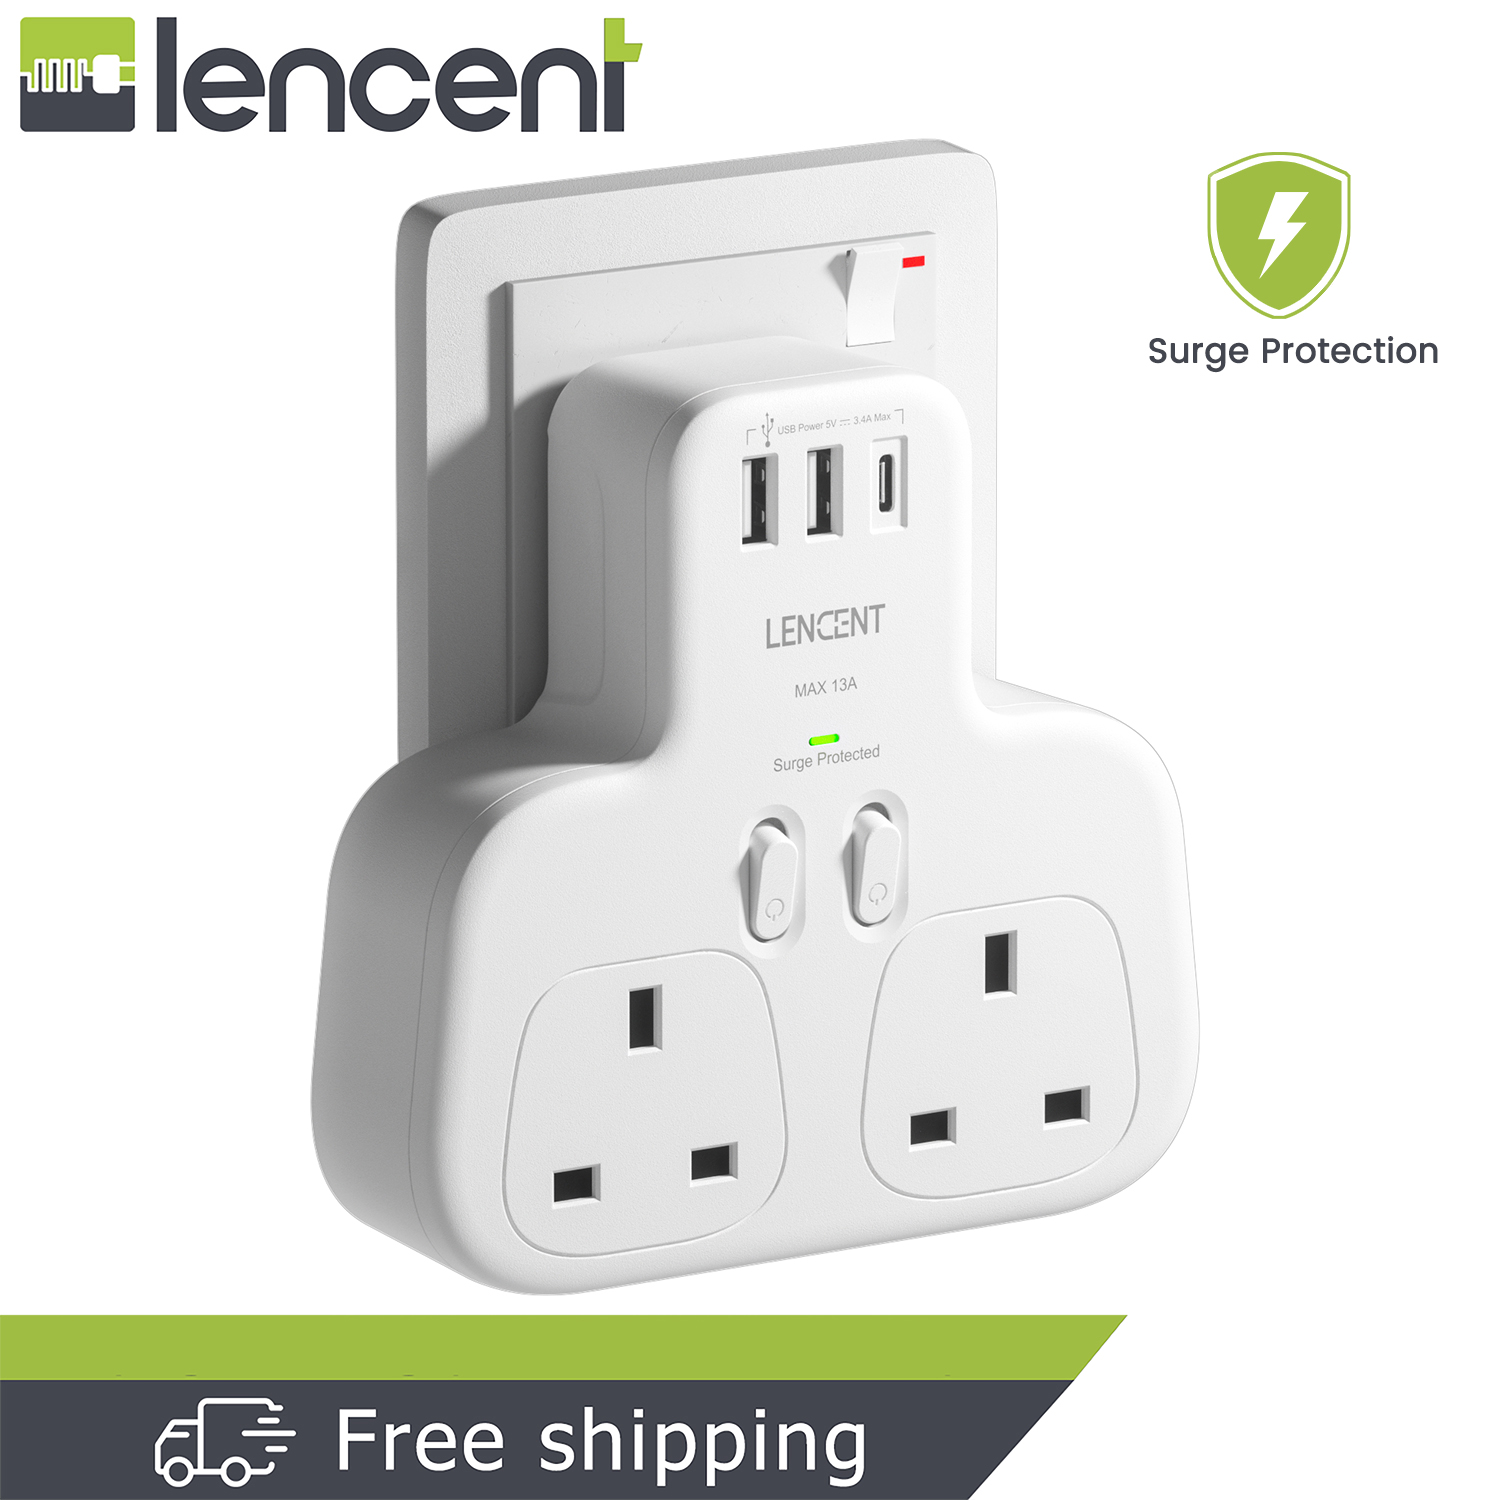  USB Wall Charger, LENCENT Wall Adapter with AC Outlet and 3 USB  Ports, Cube Power Strip Extender Plug Expander with Multiple USB Charger,  NO Surge Protector for Travel Cruise Ship, Home